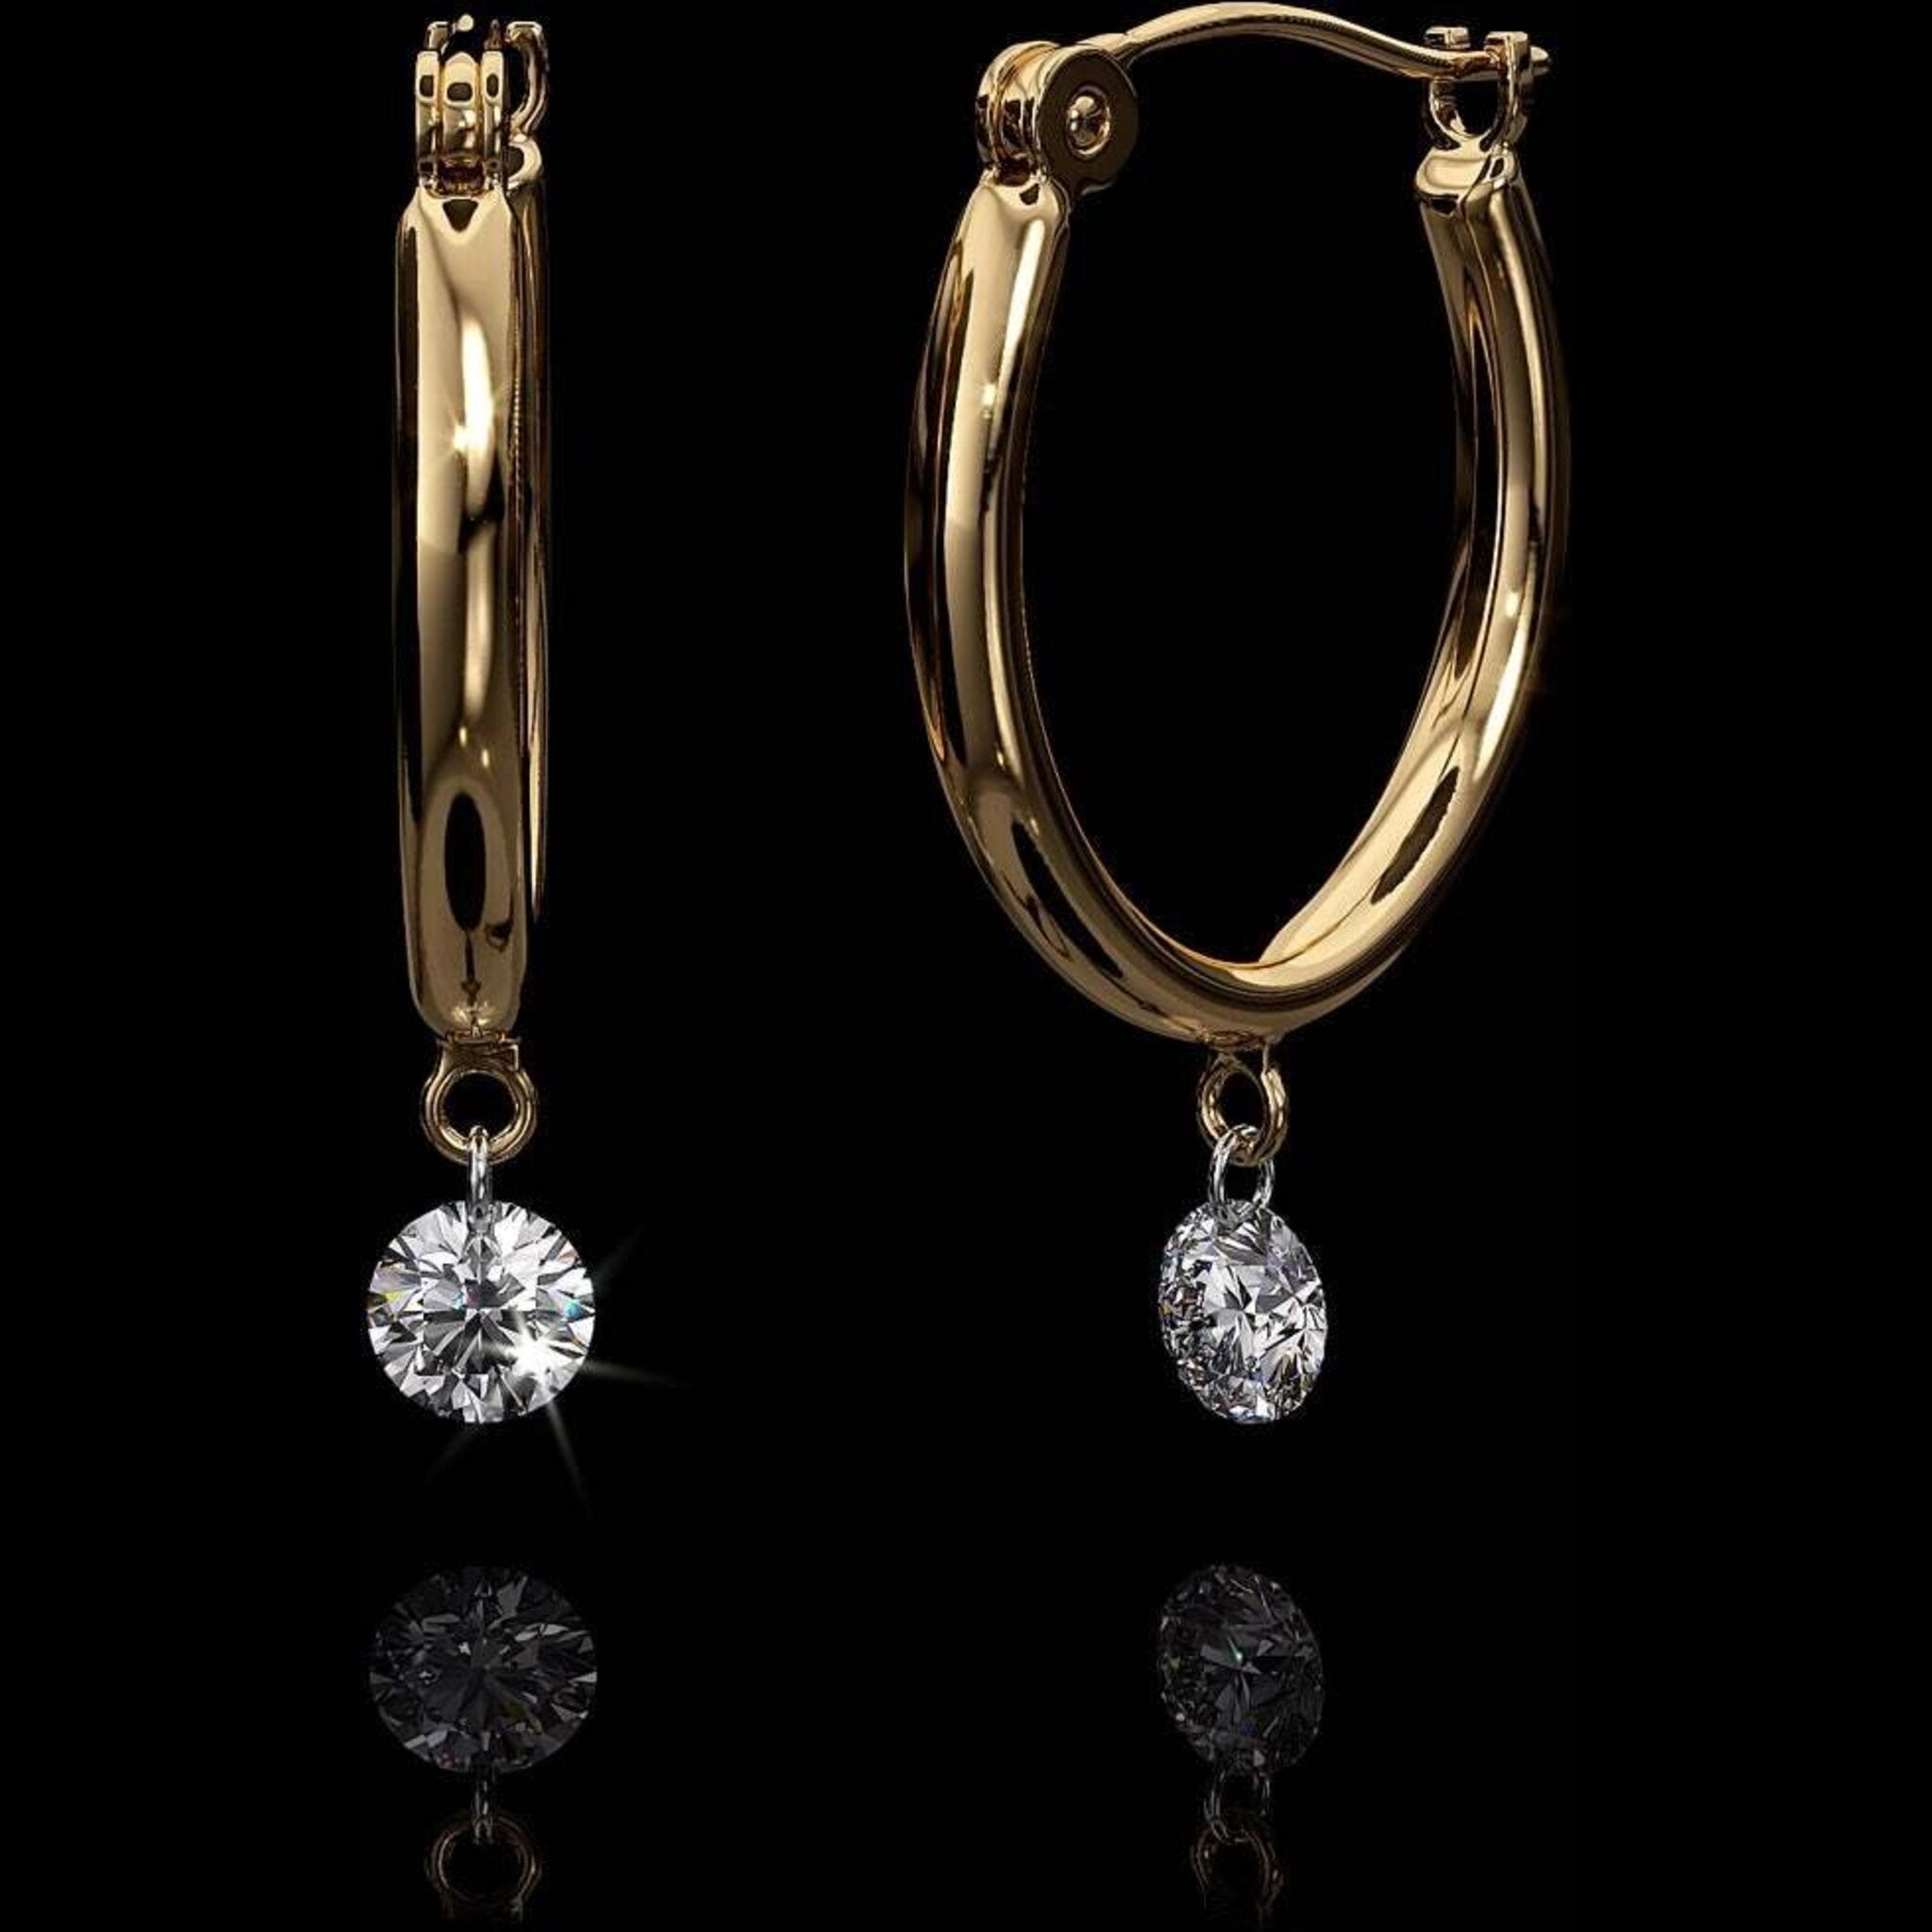 Aresa New York - Lempicka No. 1 Earrings - 18K Yellow Gold with 0.50 cts. of Diamonds